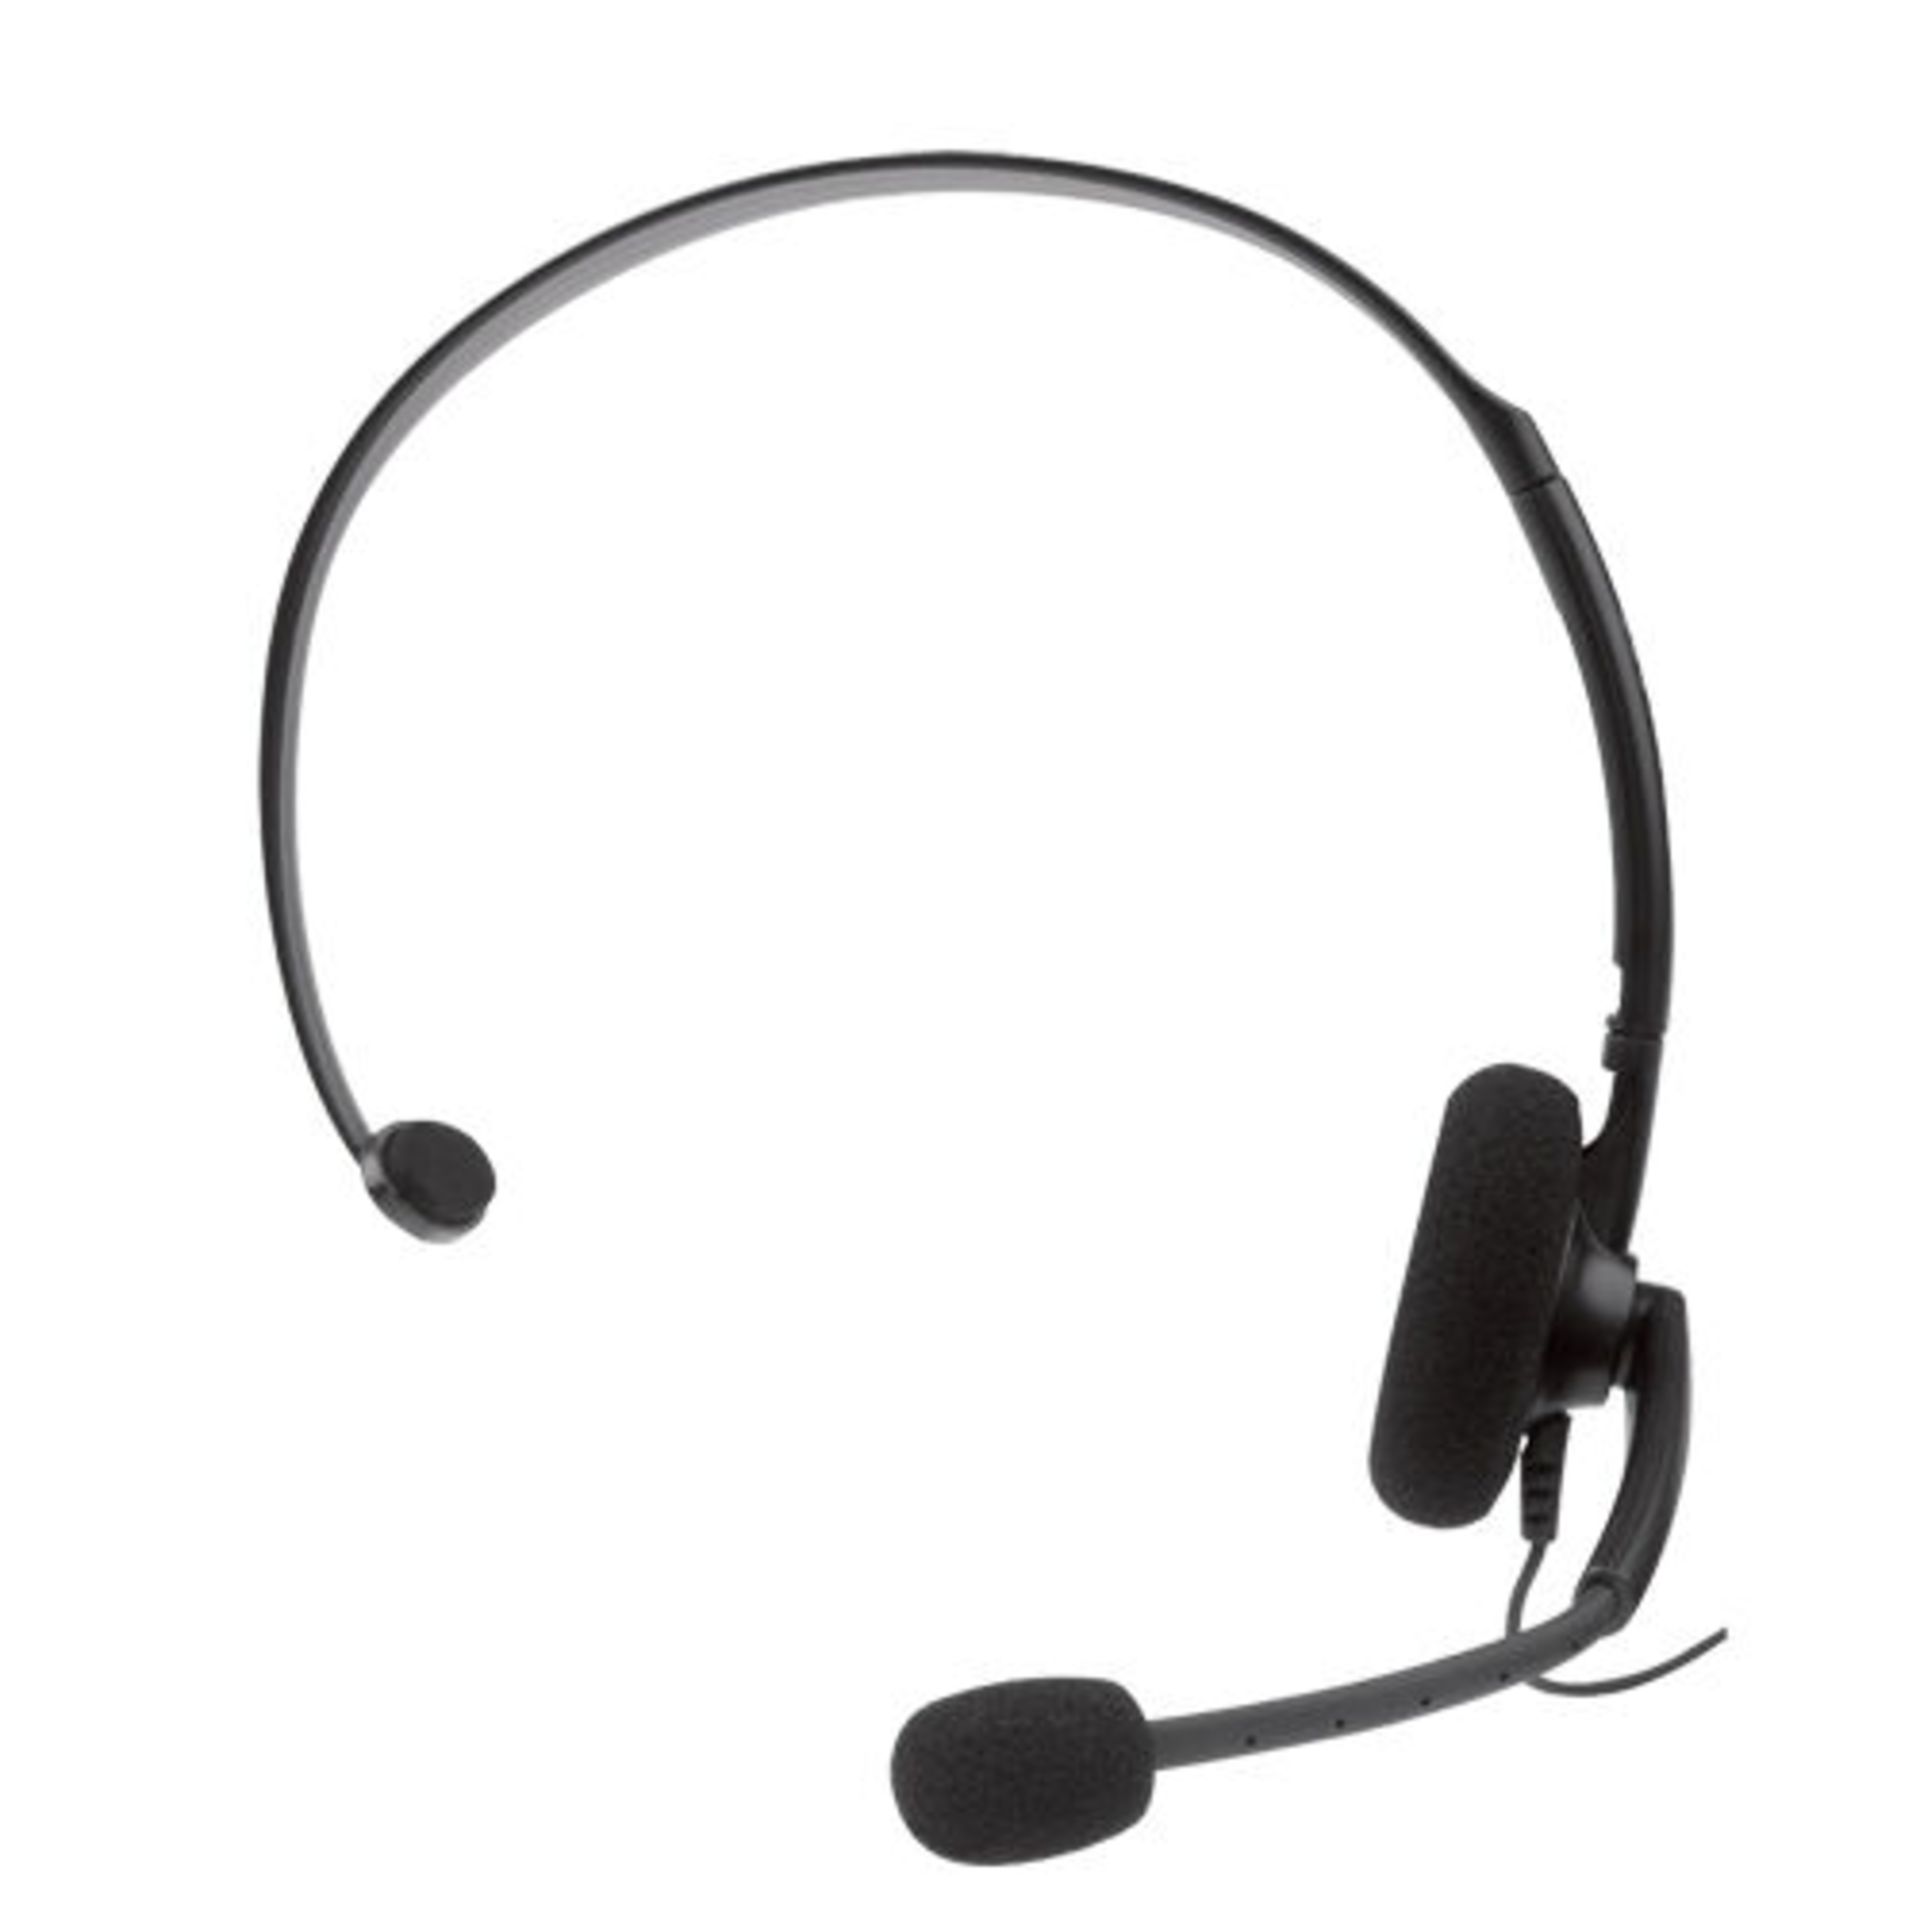 JOBLOT 500 X NEW OFFICIAL XBOX 360 LIVE ONLINE CHAT HEADSET WITH MIC GAMING HEADPHONES 2.5MM AUX - Image 4 of 6